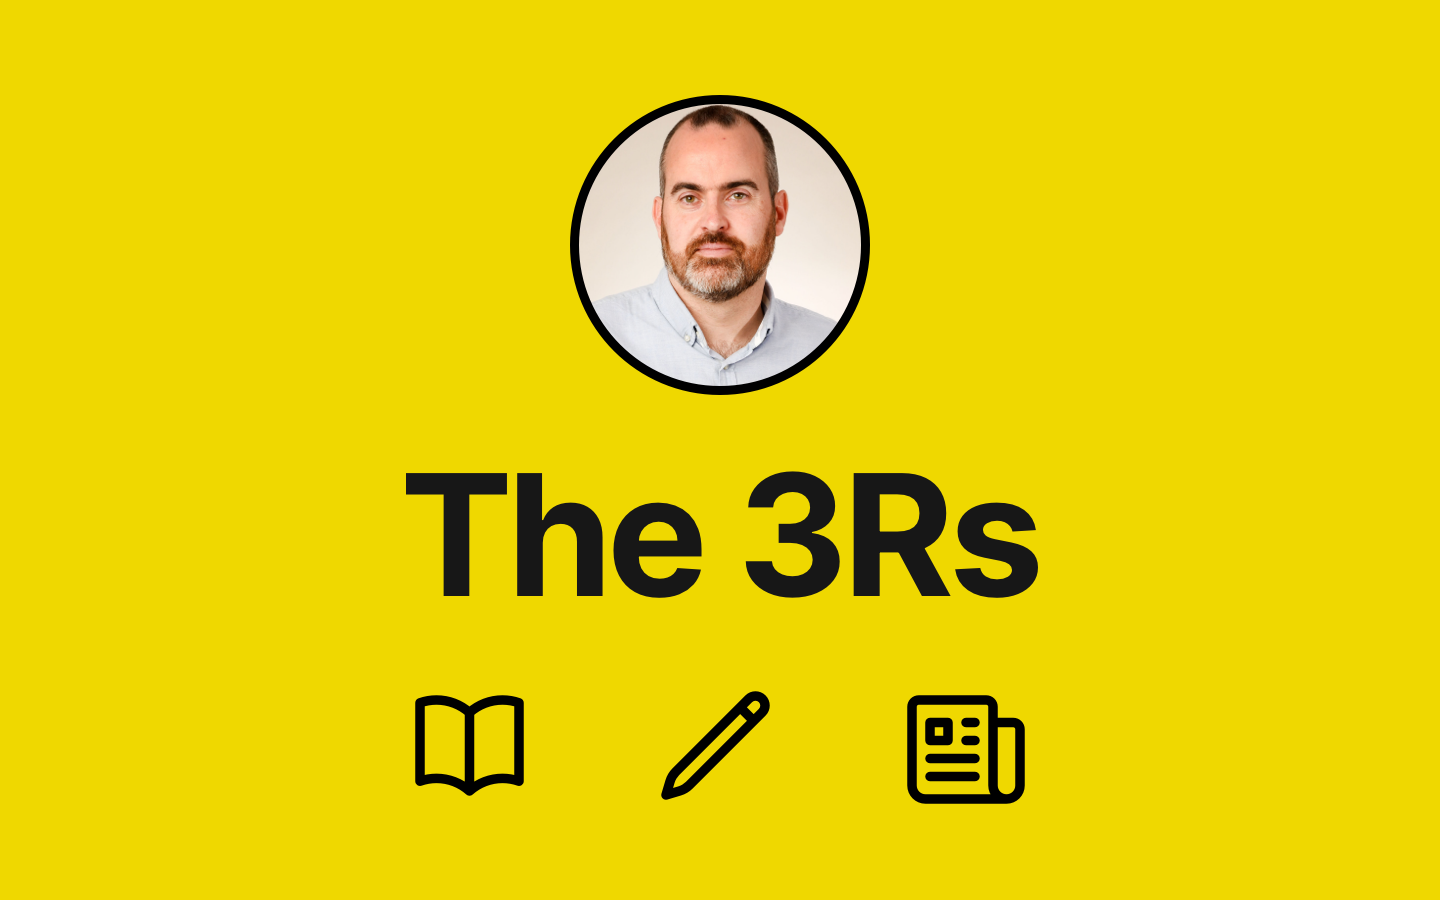 The 3Rs - Reading, writing, and research to be interested in #43 feature image